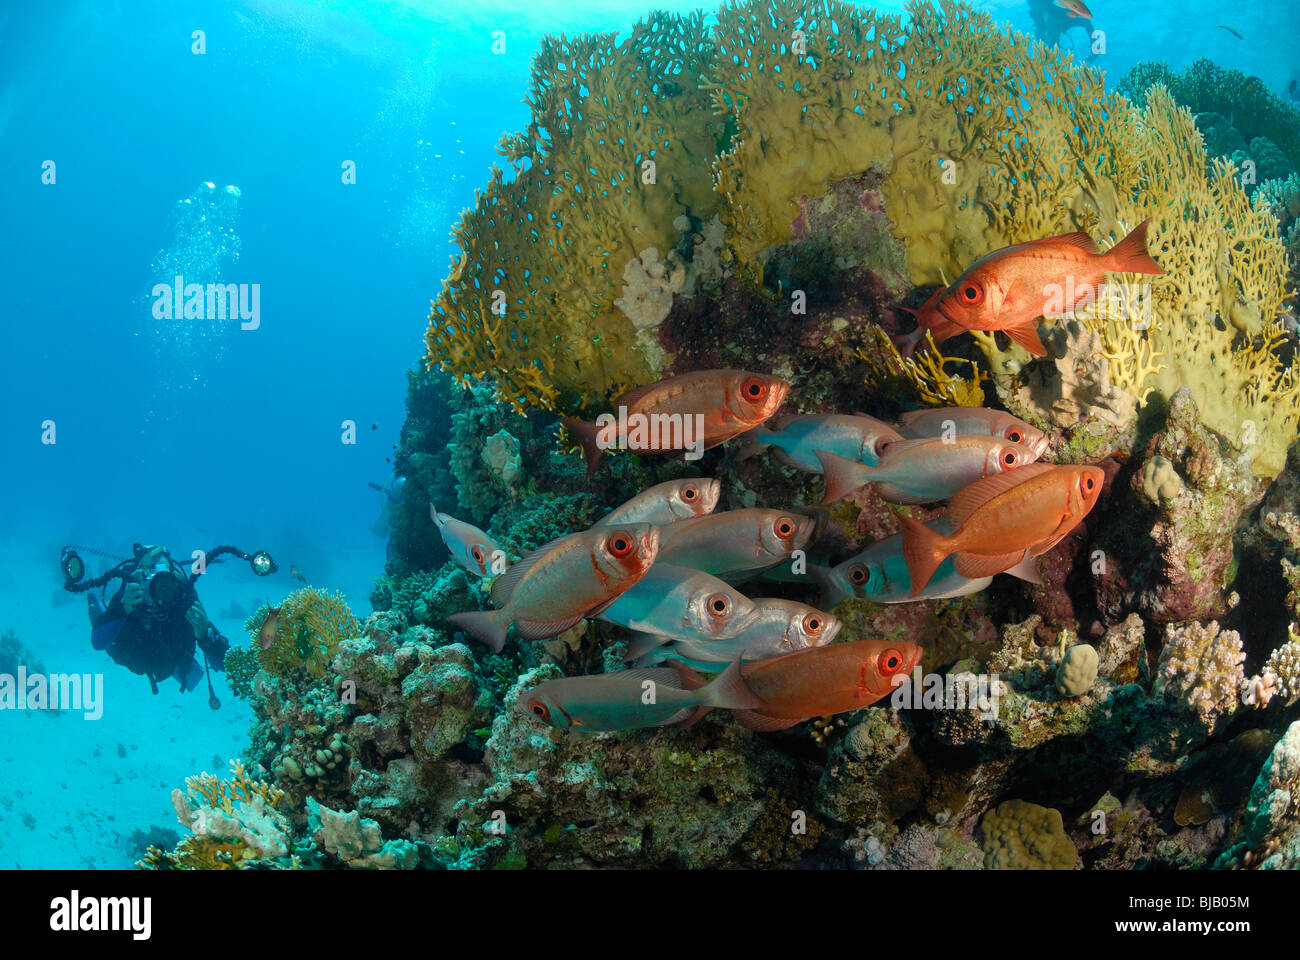 School of bigeye fishes in the Red Sea, off Safaga, Egypt Stock Photo